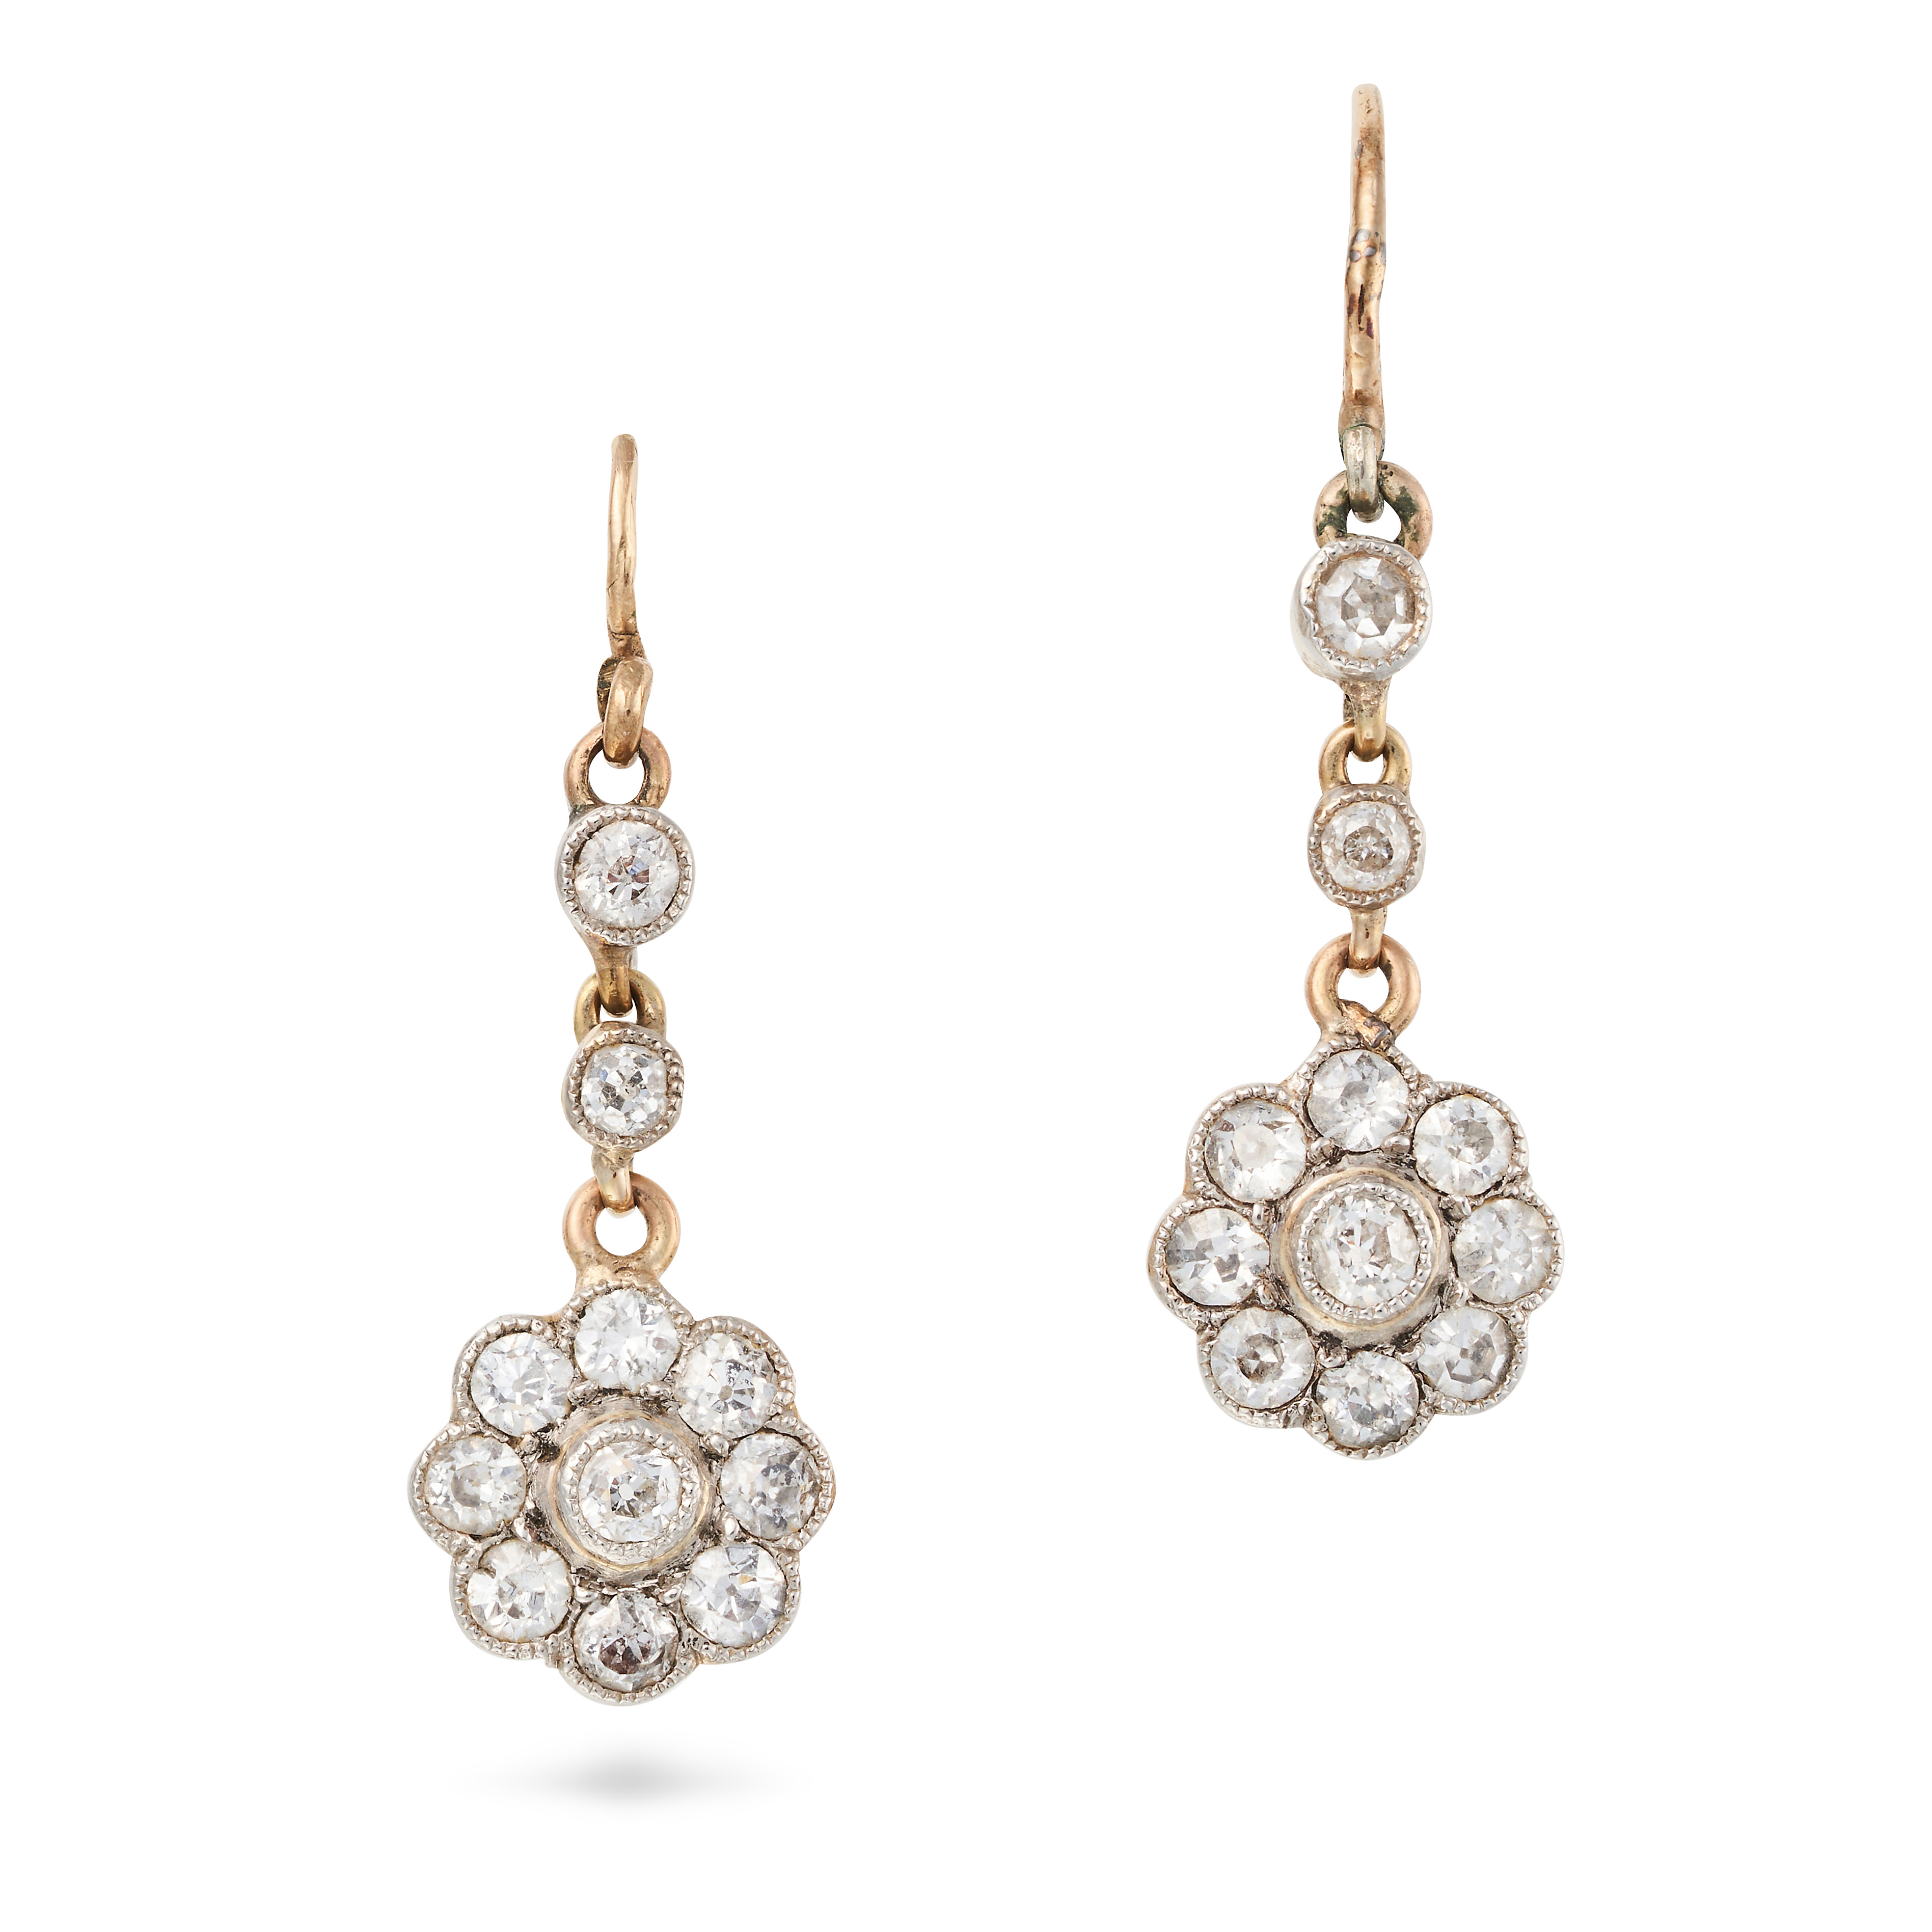 NO RESERVE - A PAIR OF ANTIQUE DIAMOND CLUSTER DROP EARRINGS each comprising a row of old cut dia...